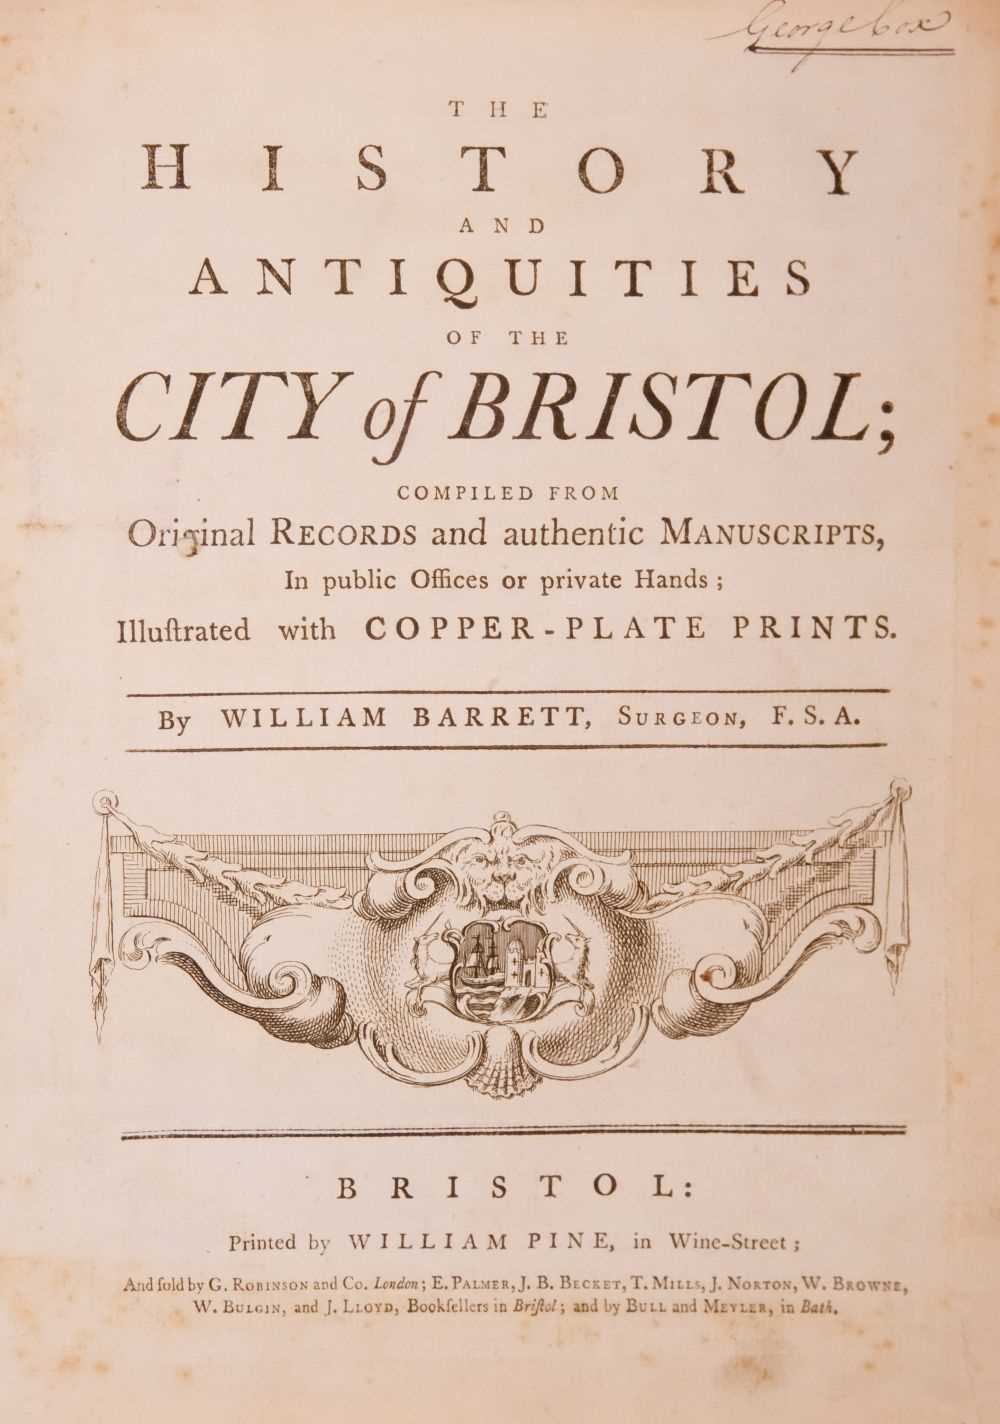 Lot 32 - Barrett (William). The History and Antiquities of the City of Bristol ..., [1789], and others